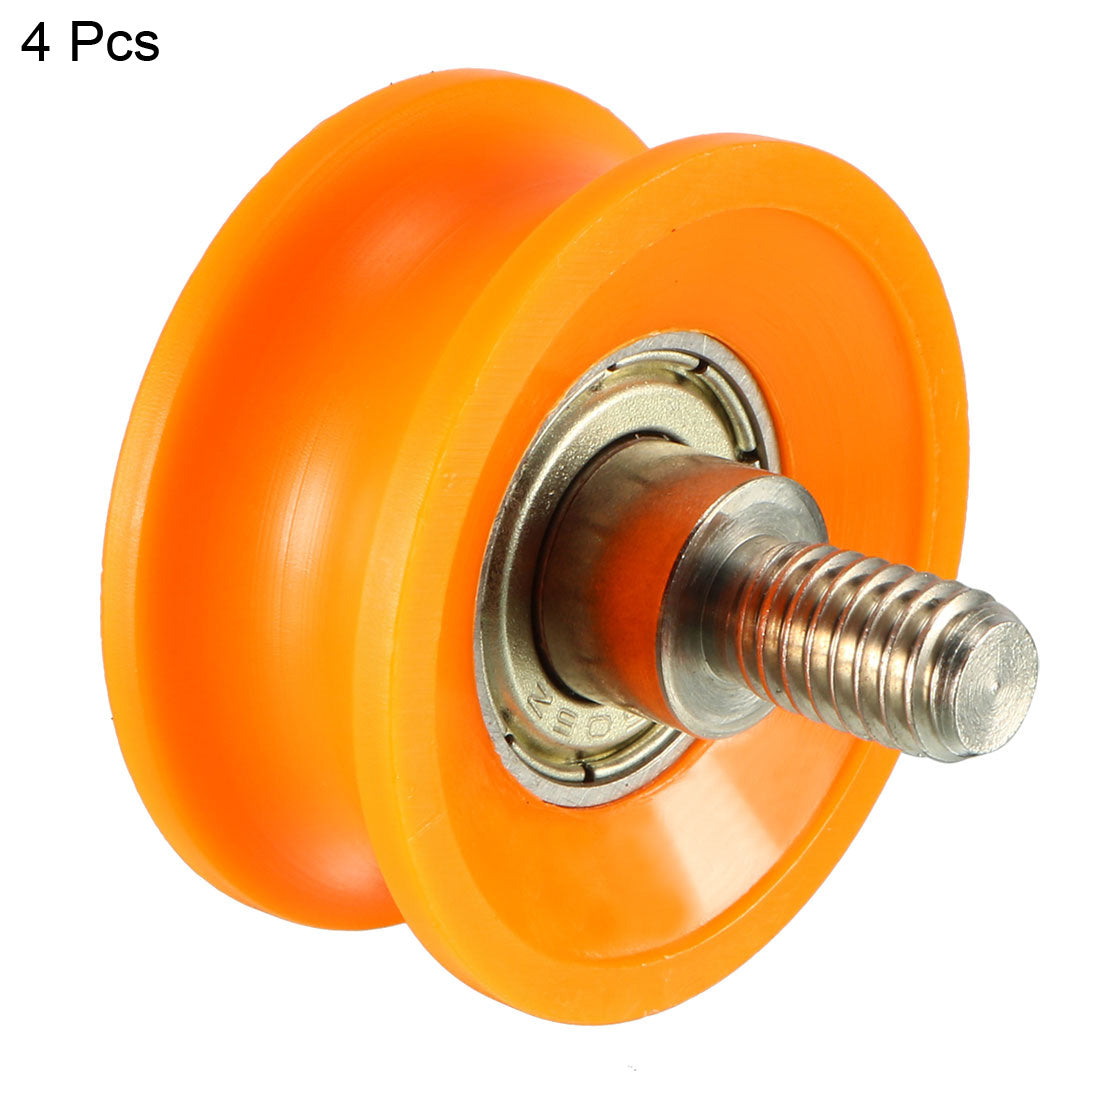 uxcell Uxcell 3mm Deep Metal V Groove Threaded Rod Track Guide Bearing Pulley Wheel Orange 30x13mm 4pcs